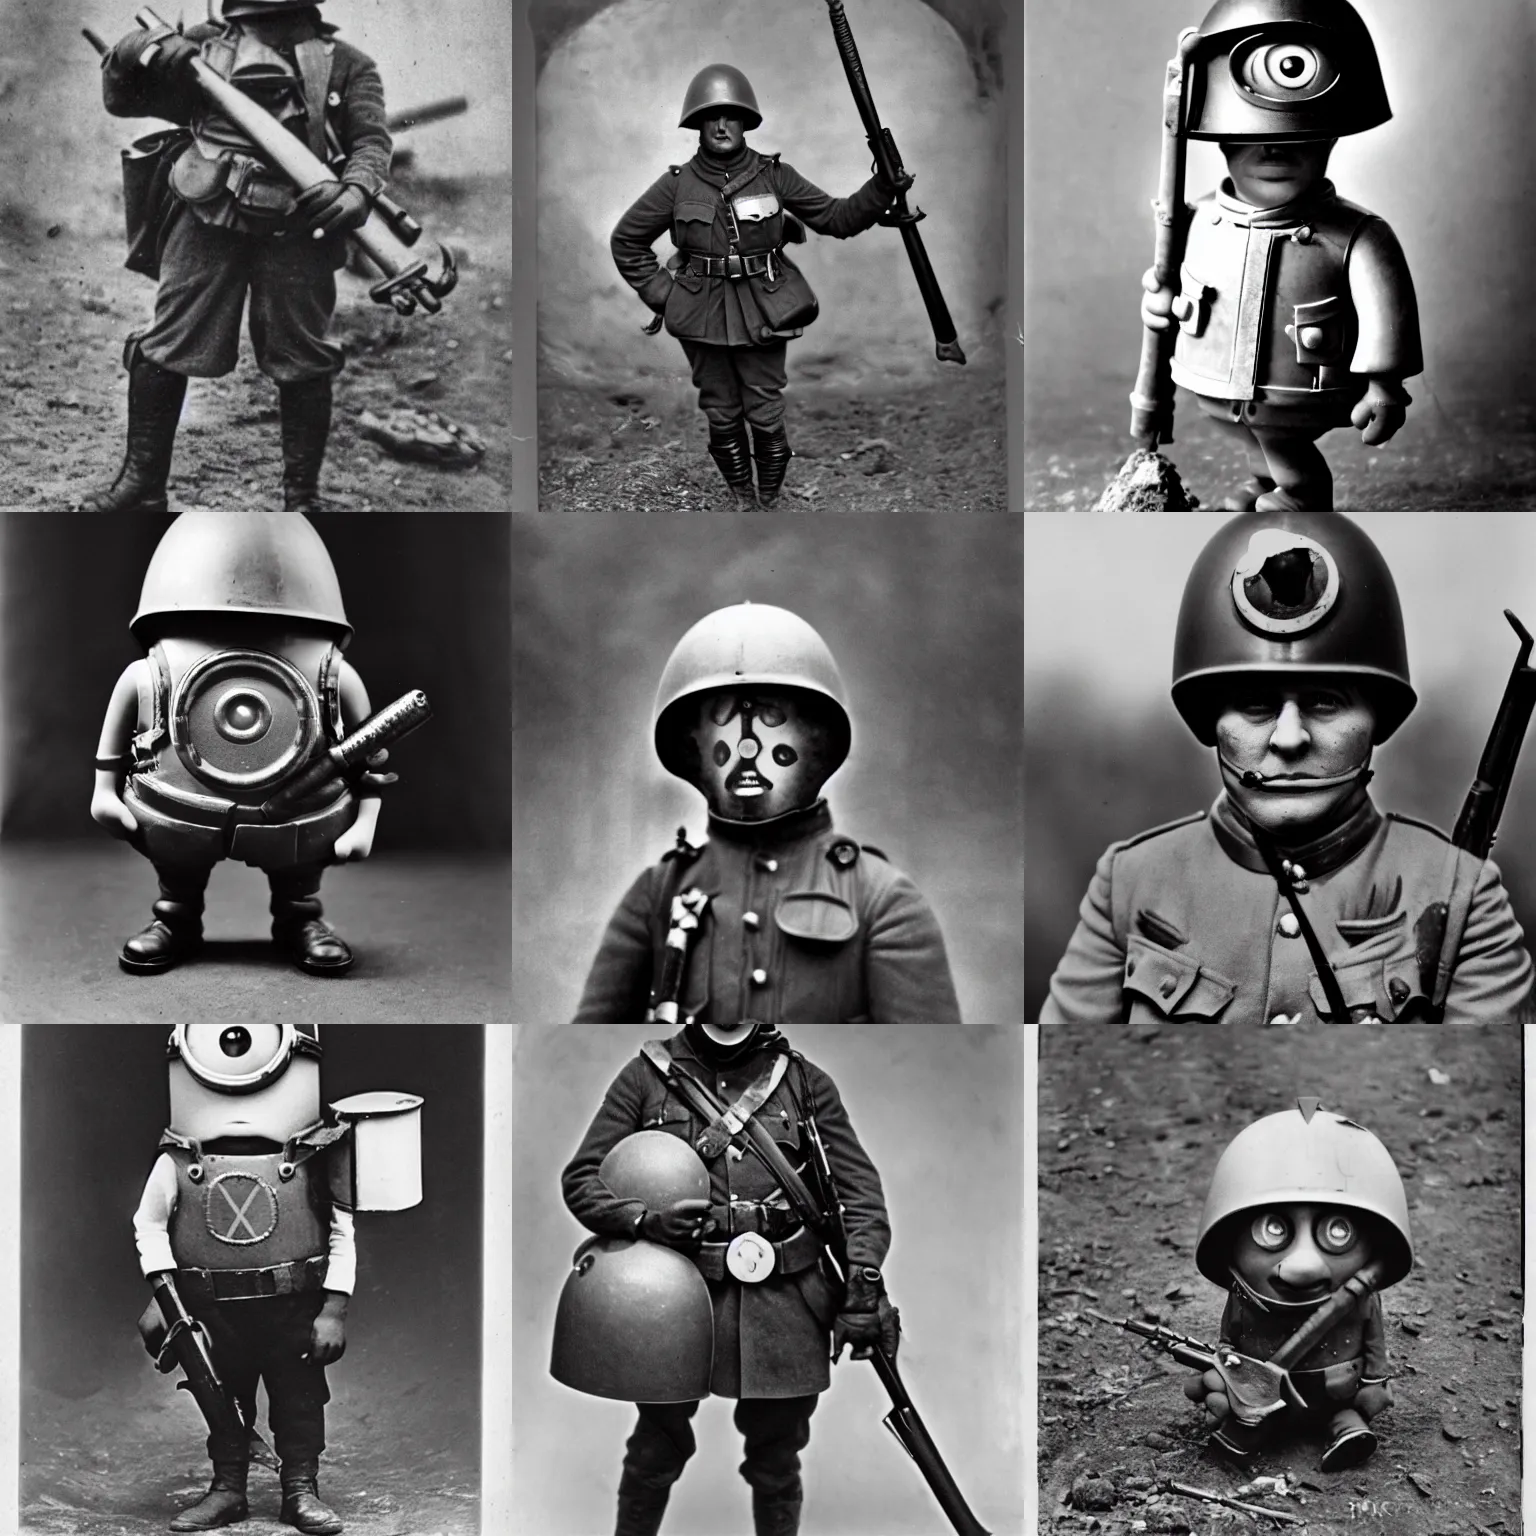 Prompt: a minion wearing a helmet carrying a weapon, world war 1, black and white photography